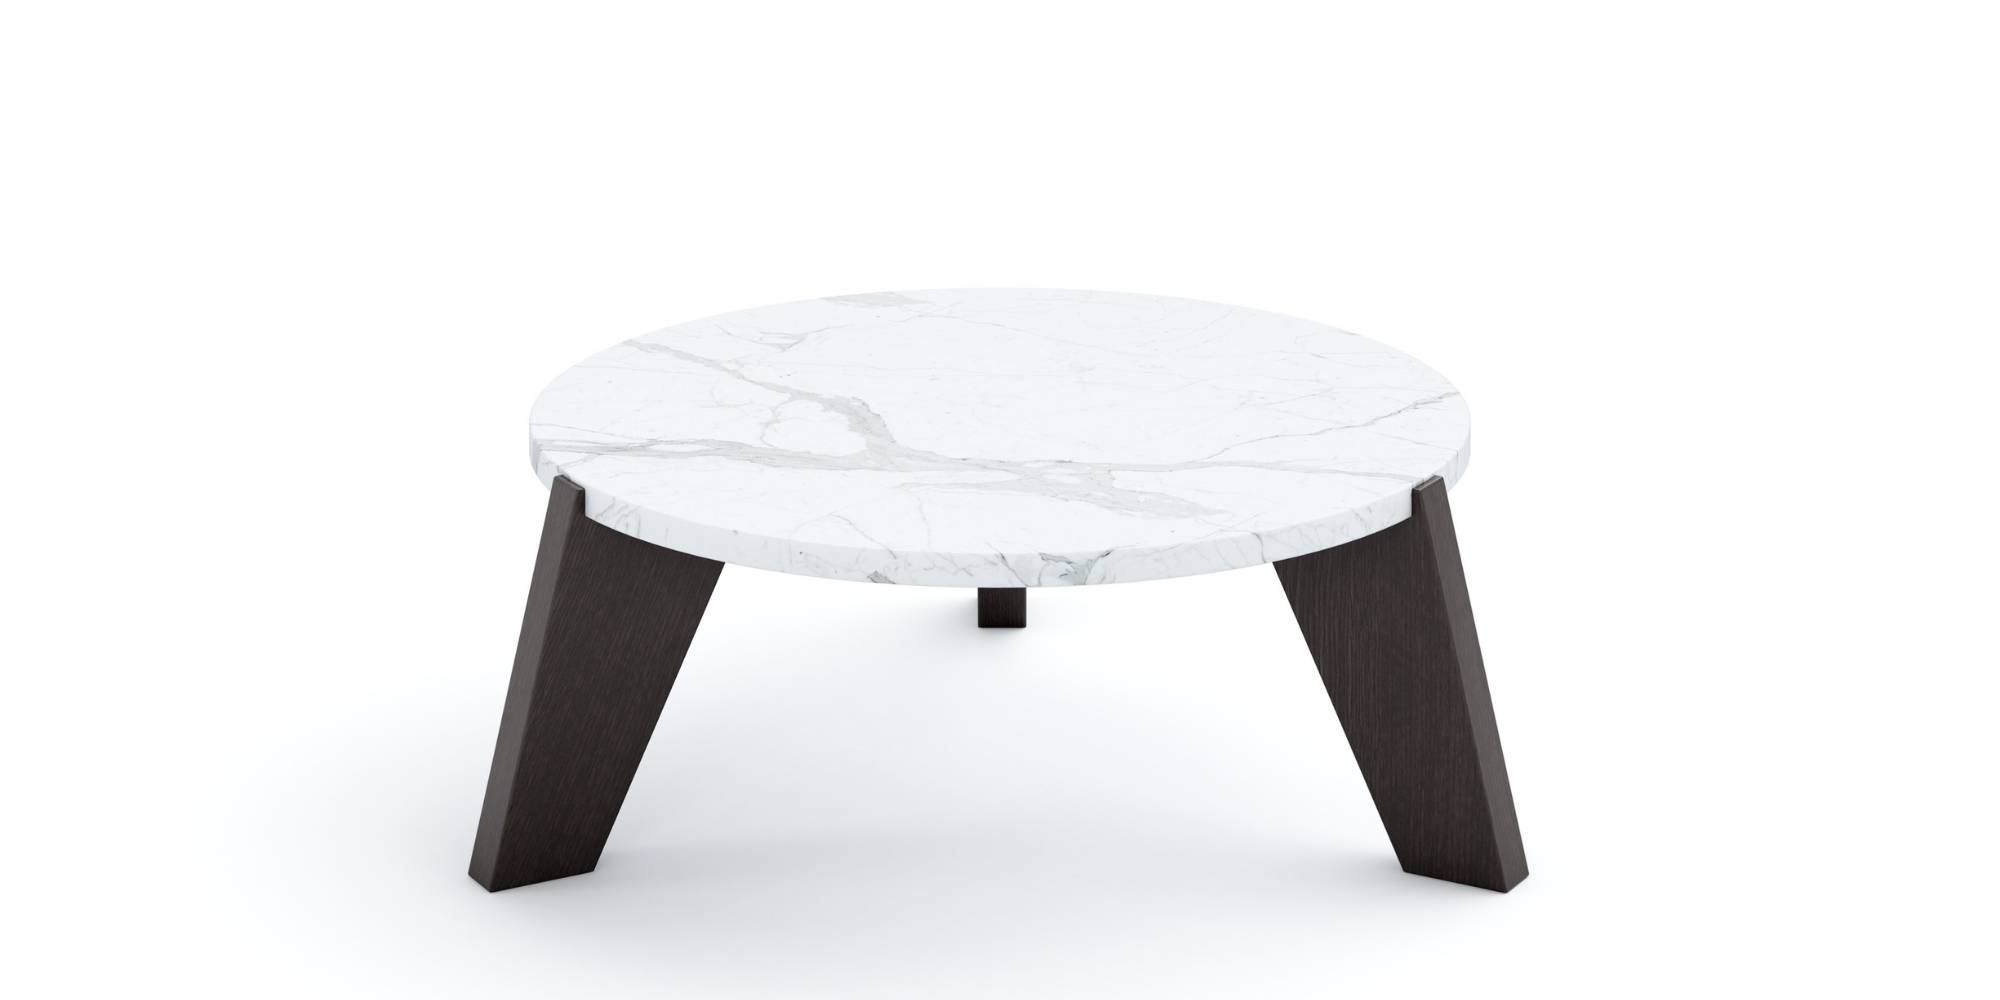 Duoro Porcelain Side Table in Outdoor Tables Side Tables for Porto Asteri collection